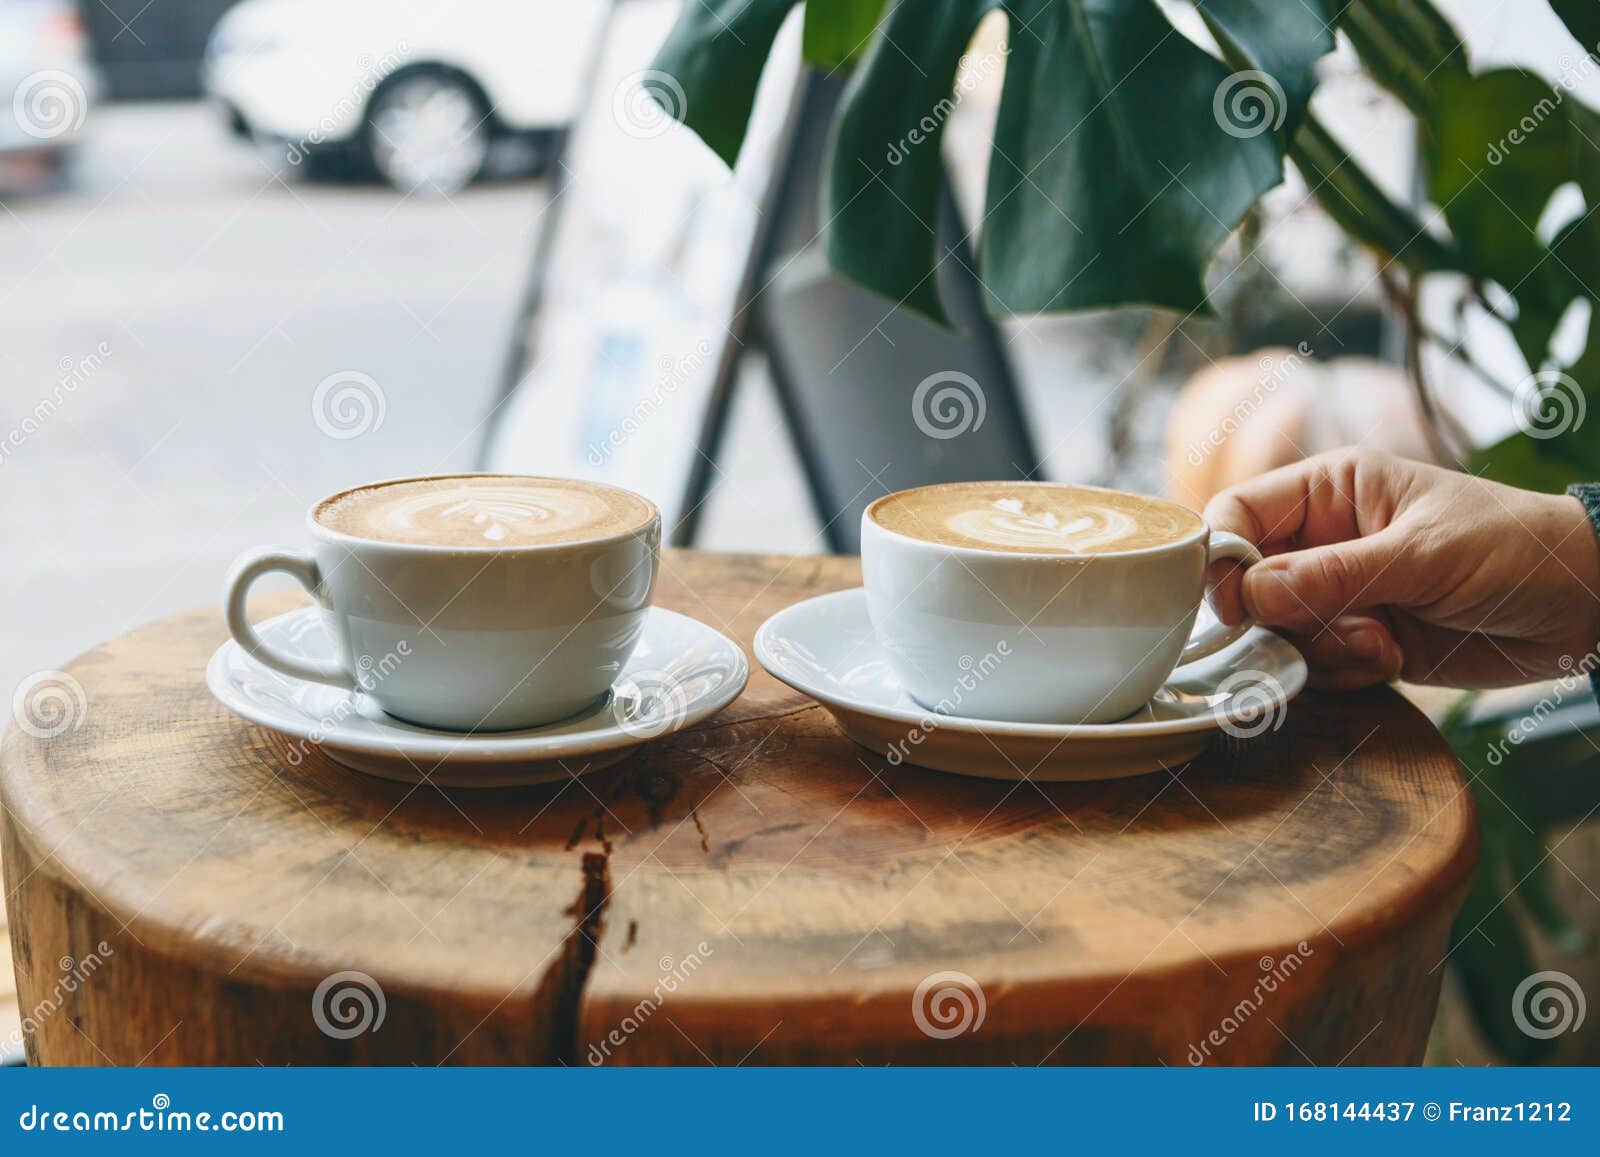 cups of aromatic coffee cappuccino